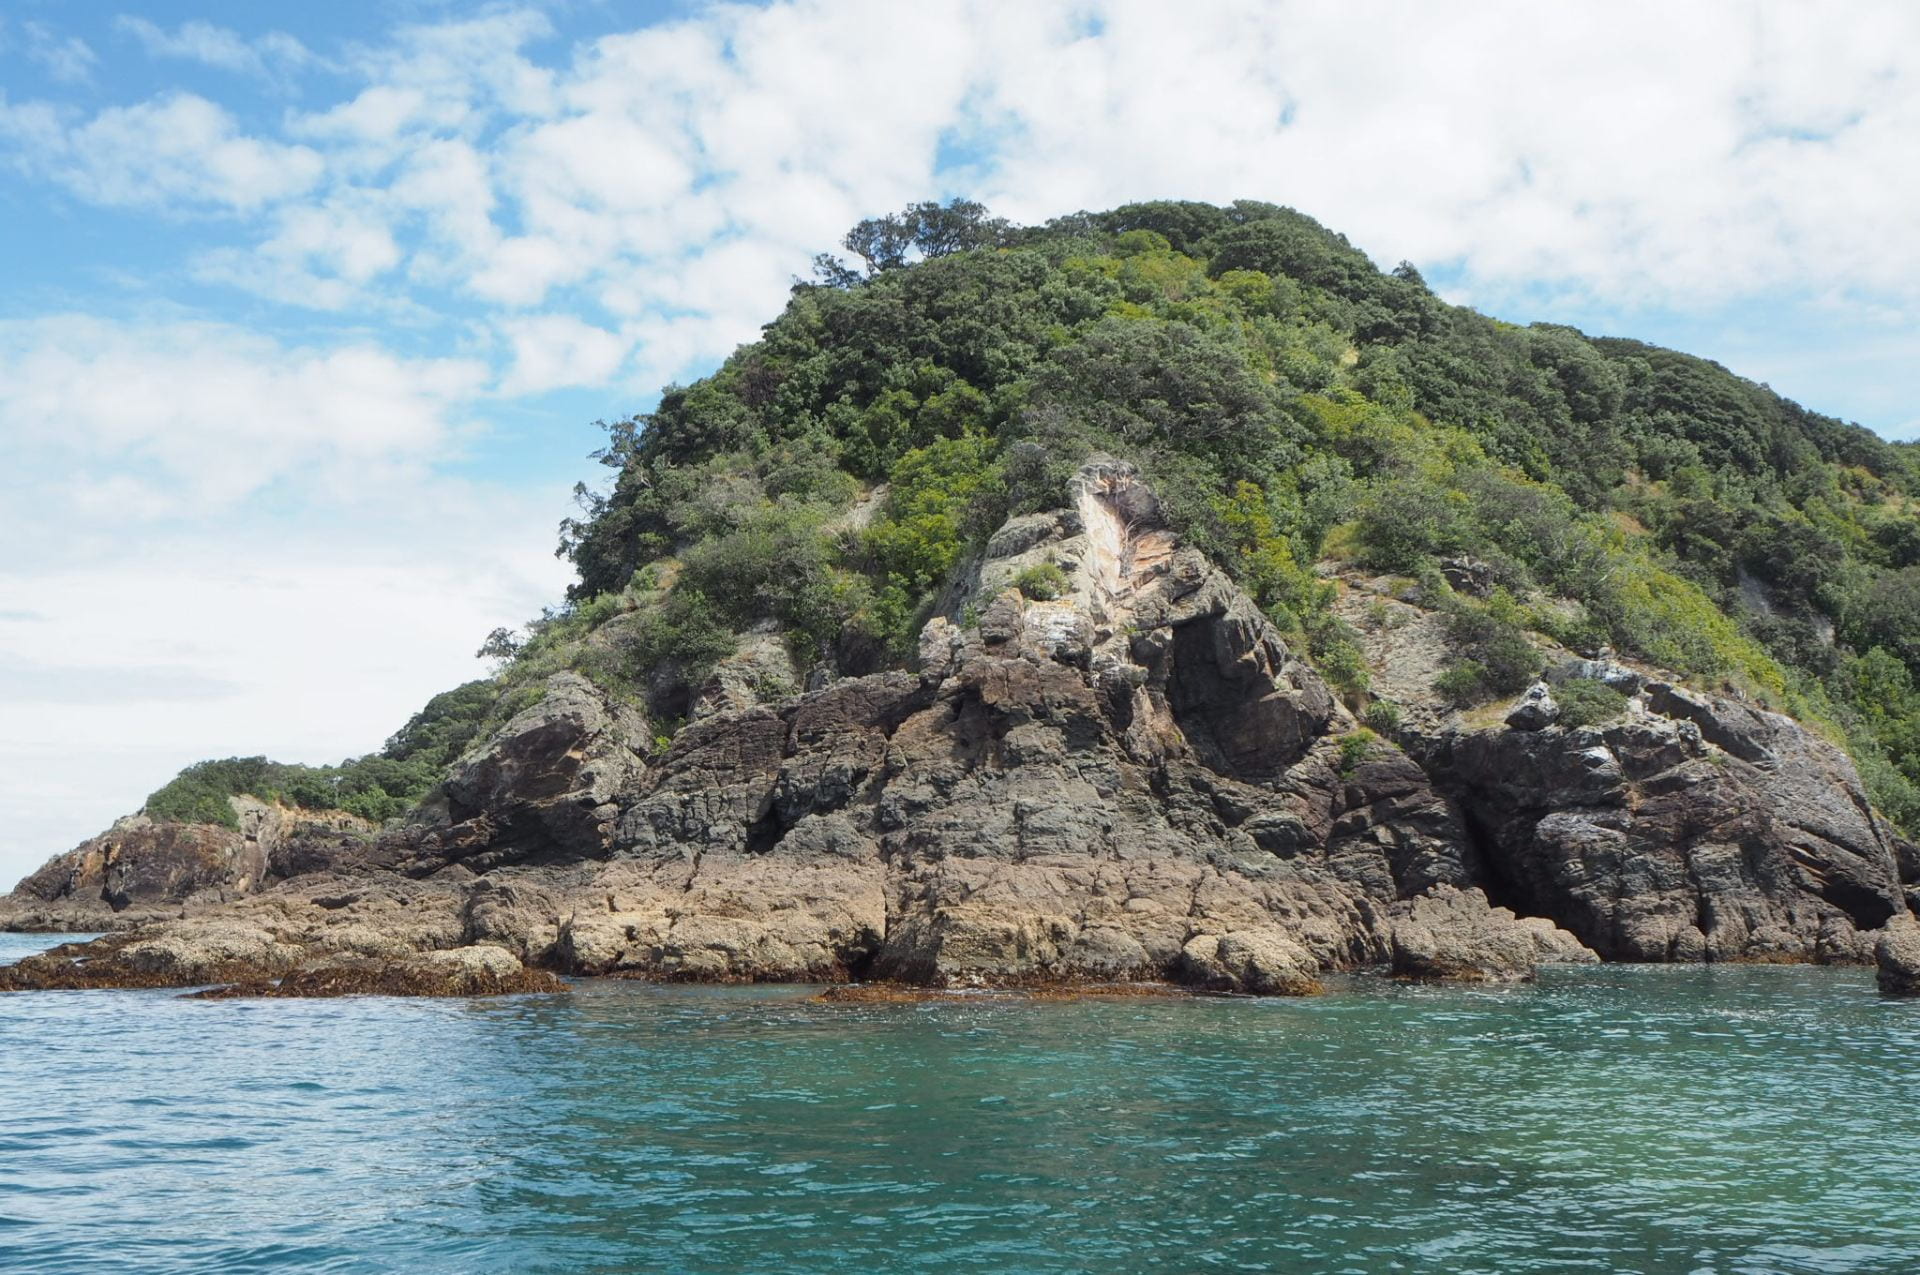 Ōtata Island, one of the islands in the Noises group in the Hauraki Gulf. Bush cascades over steep slopes that lead to rocky cliffs, above turquoise water